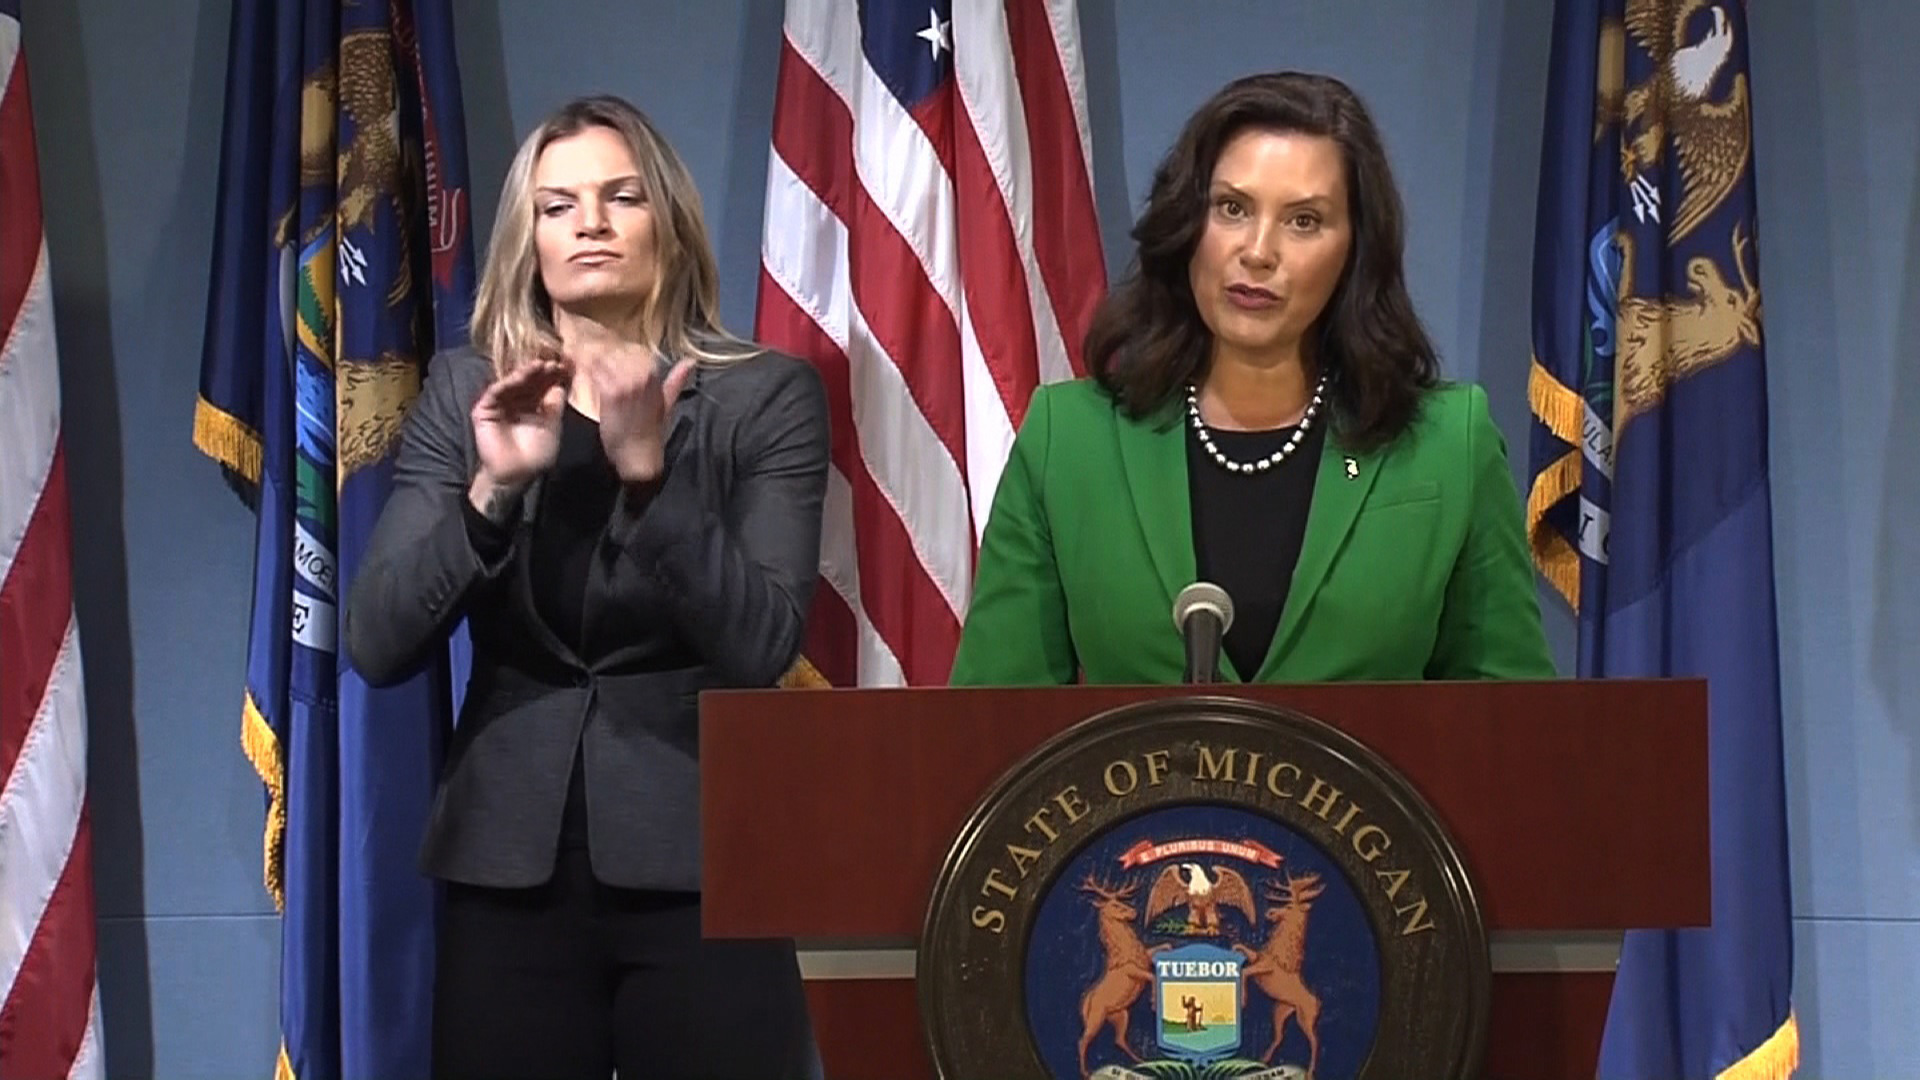 Michigan Gov. Gretchen Whitmer speaks during a press conference in Lansing, Michigan, on August 14.